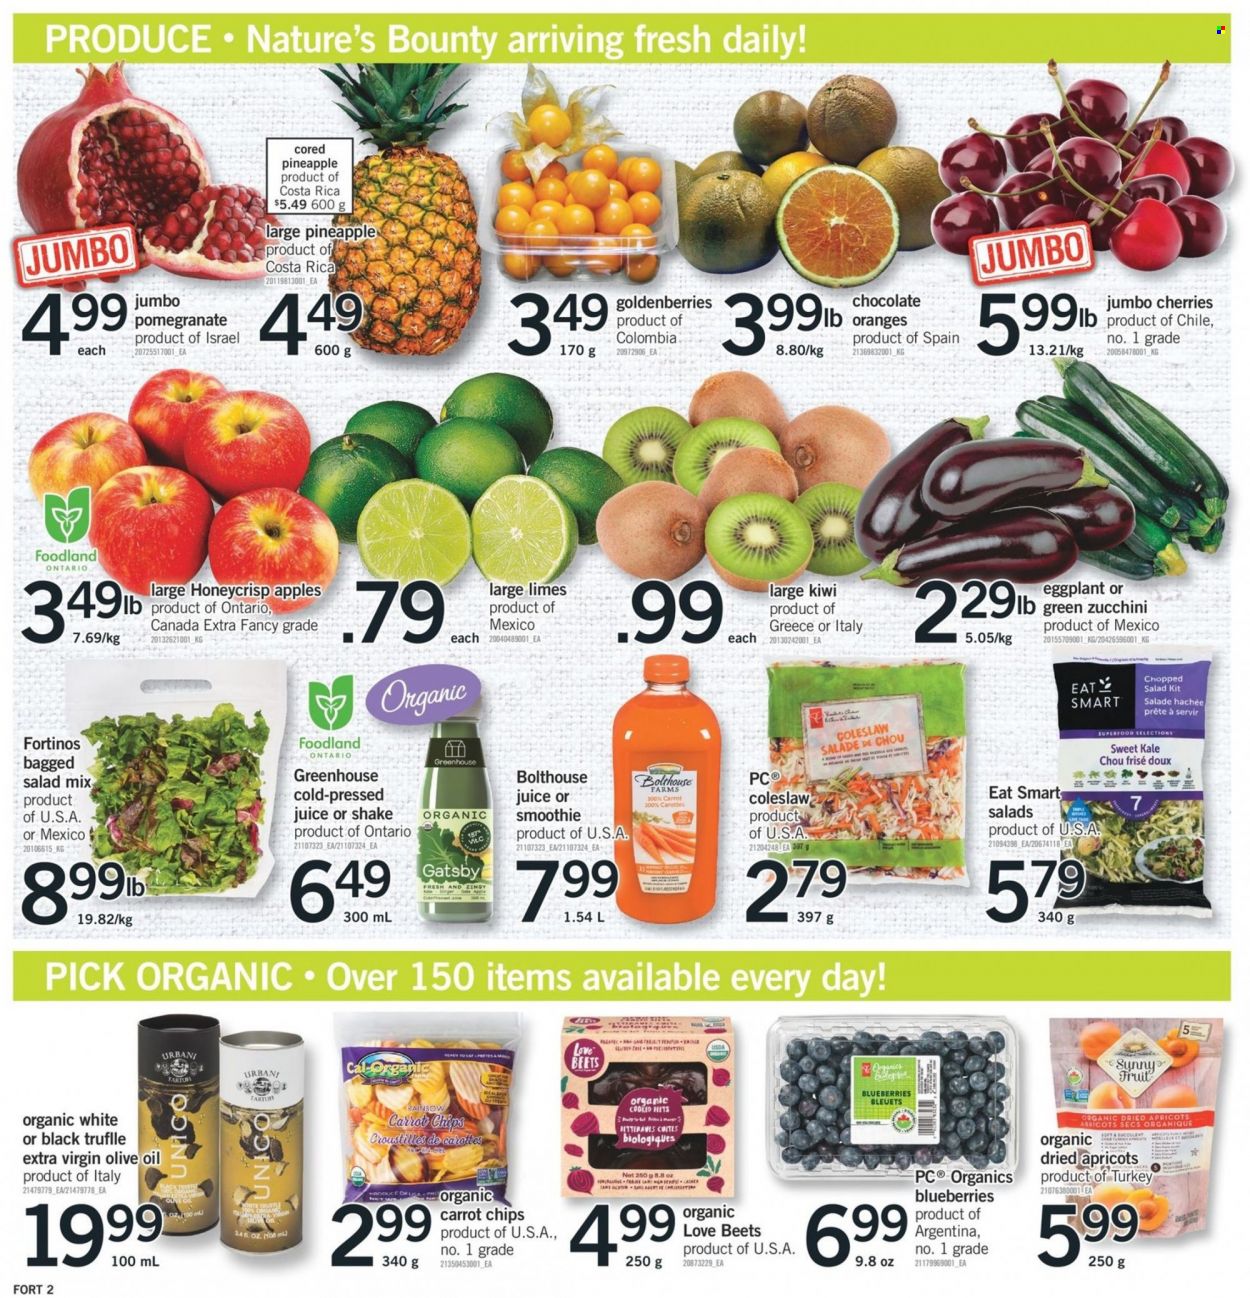 thumbnail - Fortinos Flyer - January 26, 2023 - February 01, 2023 - Sales products - ginger, zucchini, kale, salad, eggplant, chopped salad, apples, limes, pineapple, oranges, apricots, pomegranate, coleslaw, shake, chocolate, truffles, chips, extra virgin olive oil, olive oil, oil, dried fruit, juice, smoothie, greenhouse, succulent, Nature's Bounty, kiwi. Page 3.